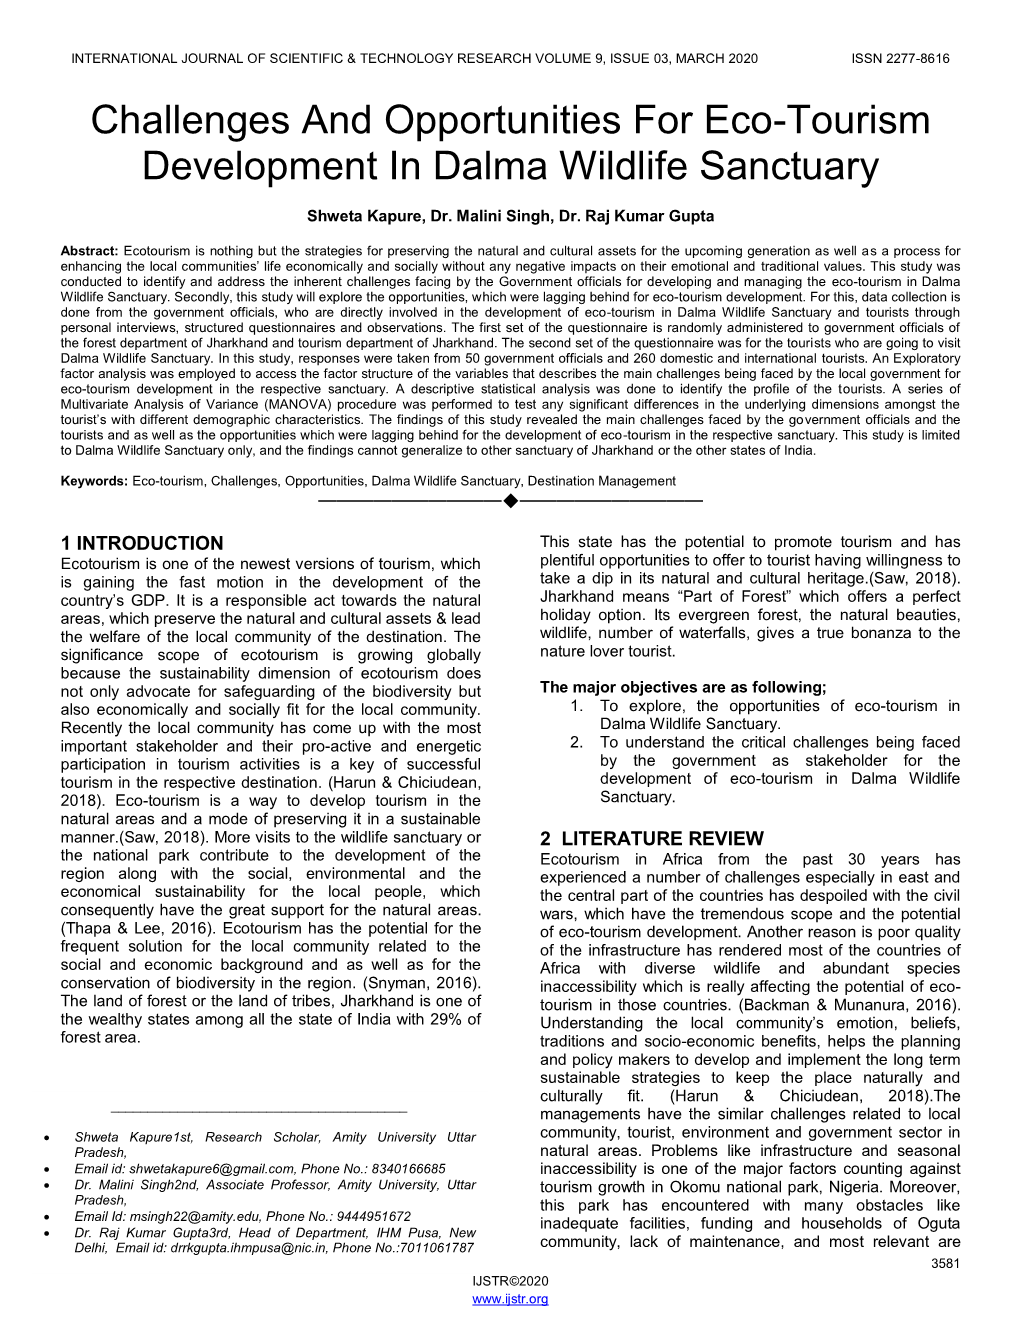 Challenges and Opportunities for Eco-Tourism Development in Dalma Wildlife Sanctuary